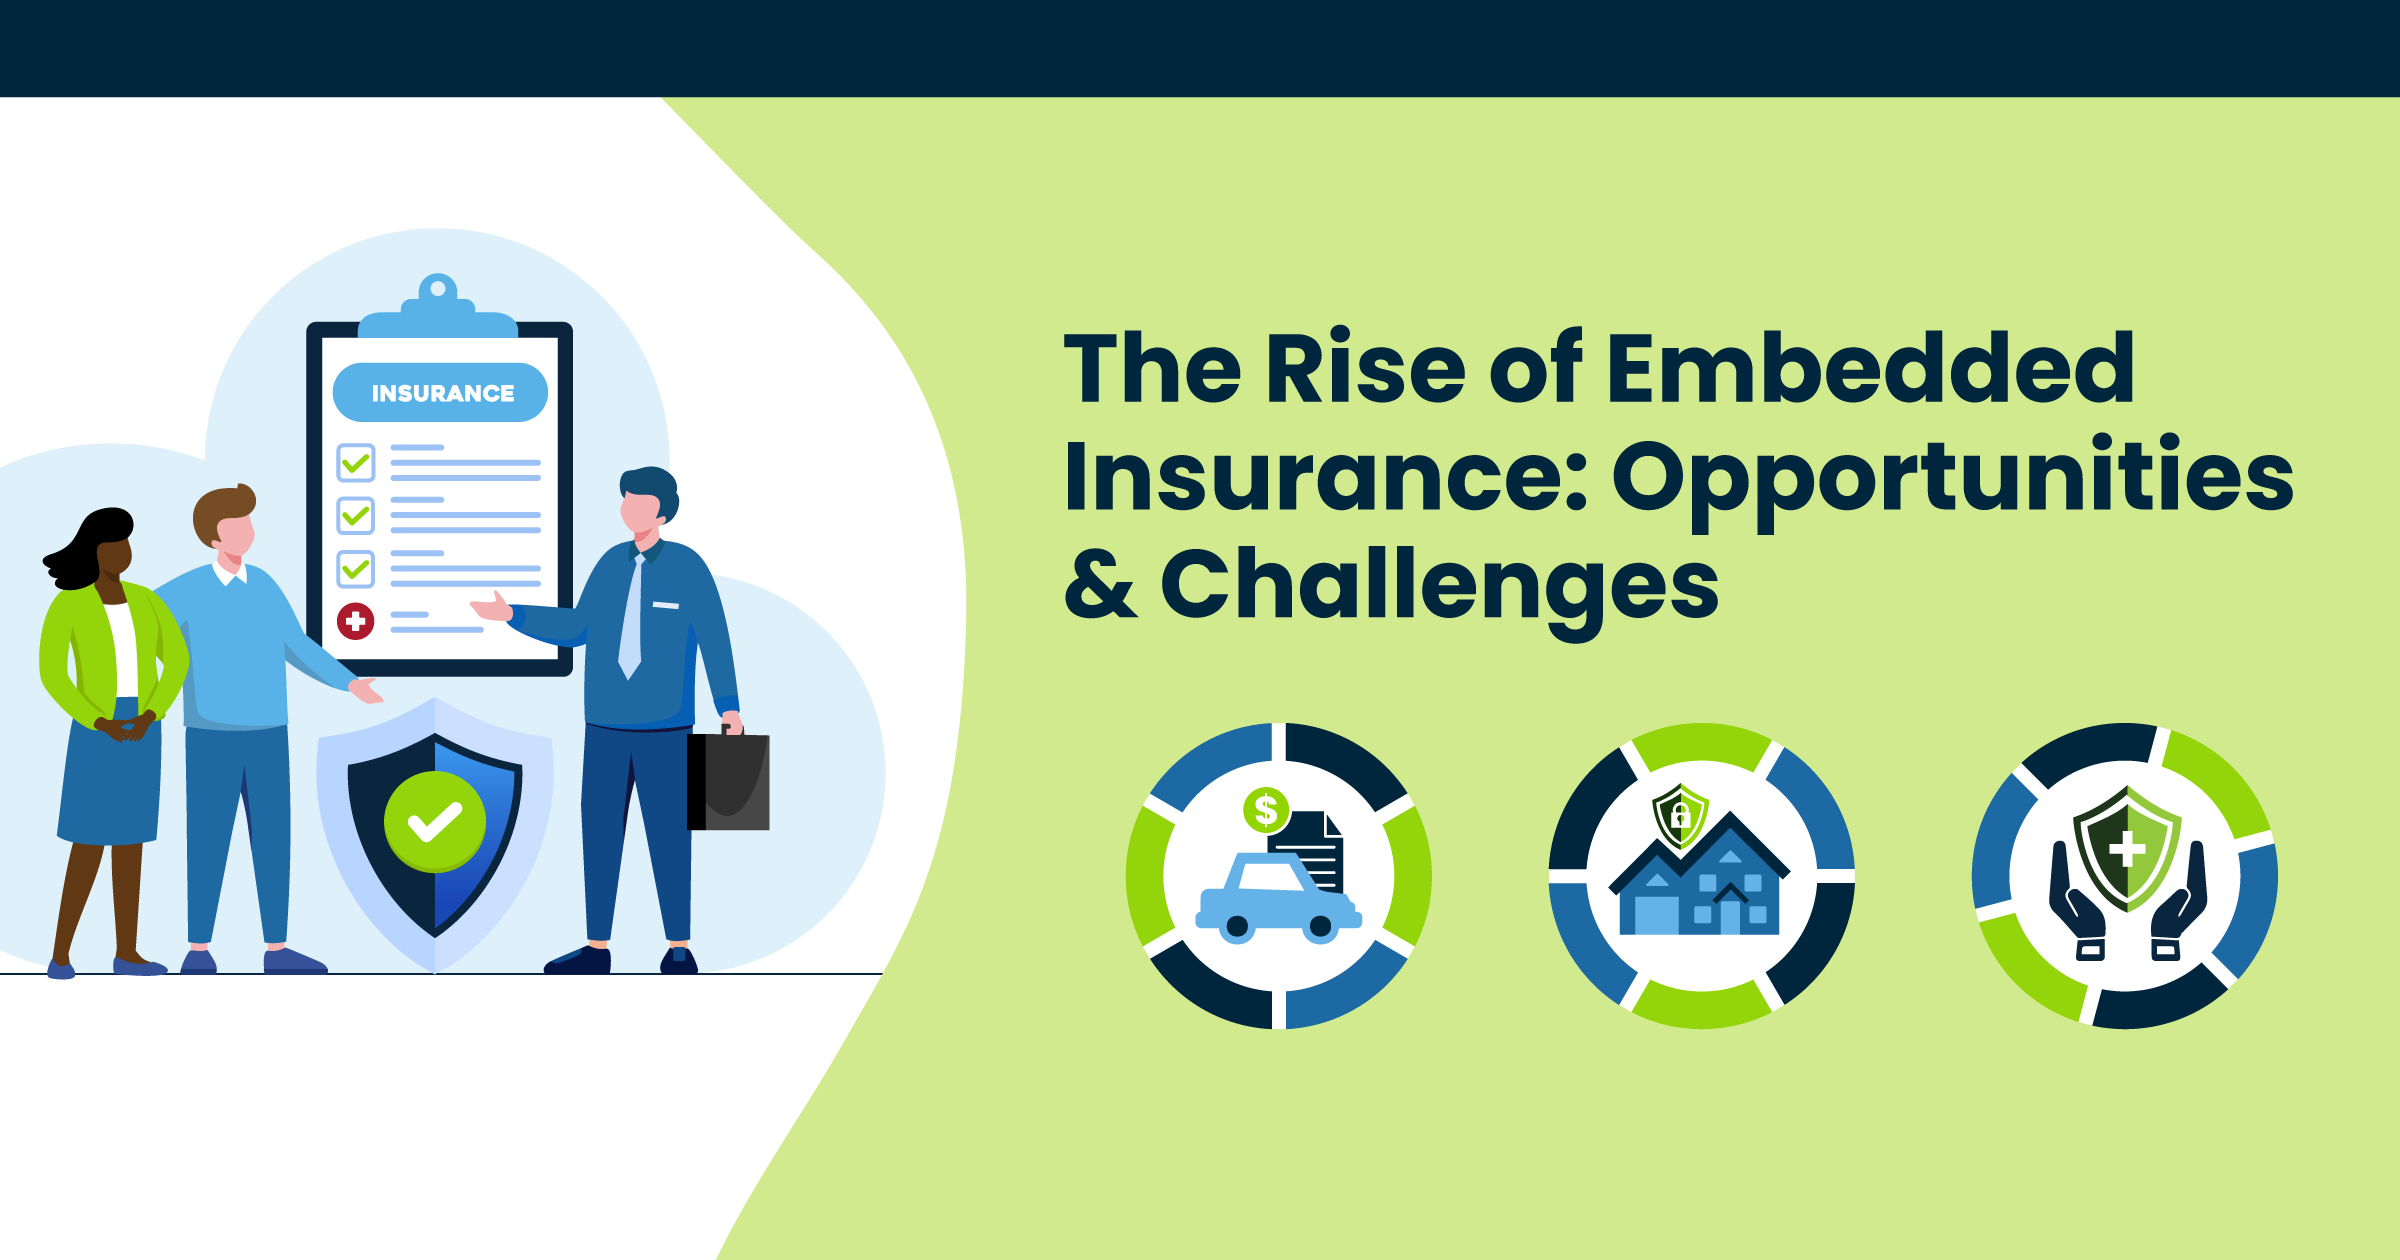 The Rise of Embedded Insurance: Opportunities & Challenges Illustration